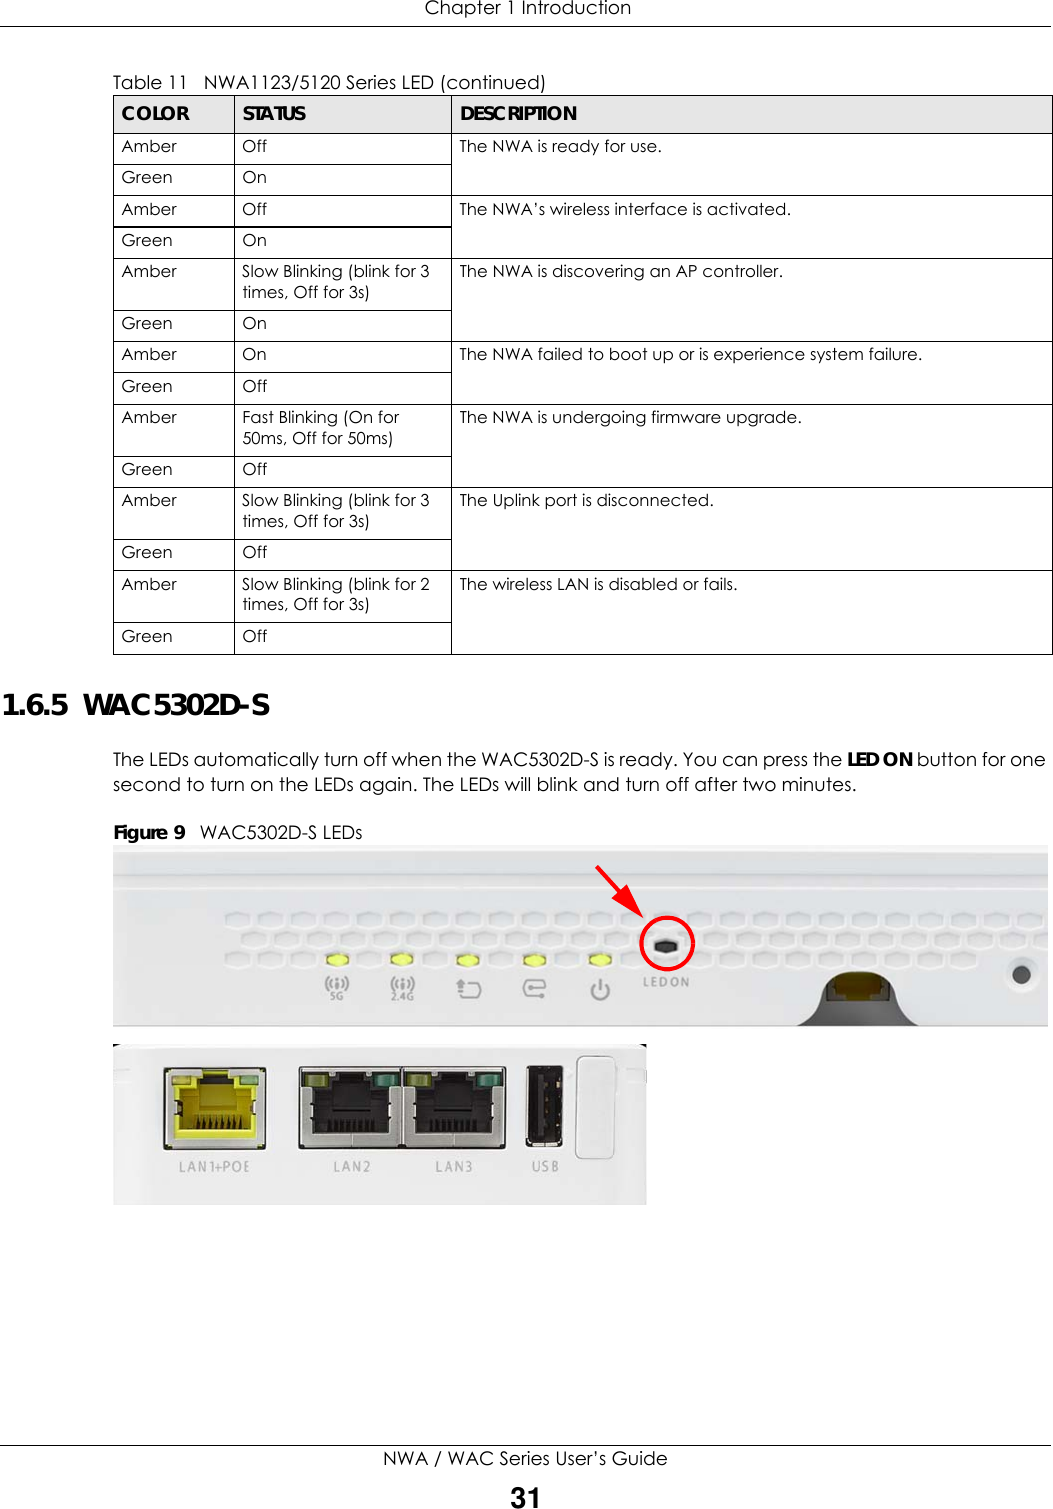  Chapter 1 IntroductionNWA / WAC Series User’s Guide311.6.5  WAC5302D-SThe LEDs automatically turn off when the WAC5302D-S is ready. You can press the LED ON button for one second to turn on the LEDs again. The LEDs will blink and turn off after two minutes.Figure 9   WAC5302D-S LEDs Amber Off The NWA is ready for use.Green OnAmber Off The NWA’s wireless interface is activated.Green OnAmber Slow Blinking (blink for 3 times, Off for 3s)The NWA is discovering an AP controller.Green OnAmber On The NWA failed to boot up or is experience system failure.Green OffAmber Fast Blinking (On for 50ms, Off for 50ms)The NWA is undergoing firmware upgrade.Green OffAmber Slow Blinking (blink for 3 times, Off for 3s)The Uplink port is disconnected.Green OffAmber Slow Blinking (blink for 2 times, Off for 3s)The wireless LAN is disabled or fails.Green OffTable 11   NWA1123/5120 Series LED (continued)COLOR STATUS DESCRIPTION